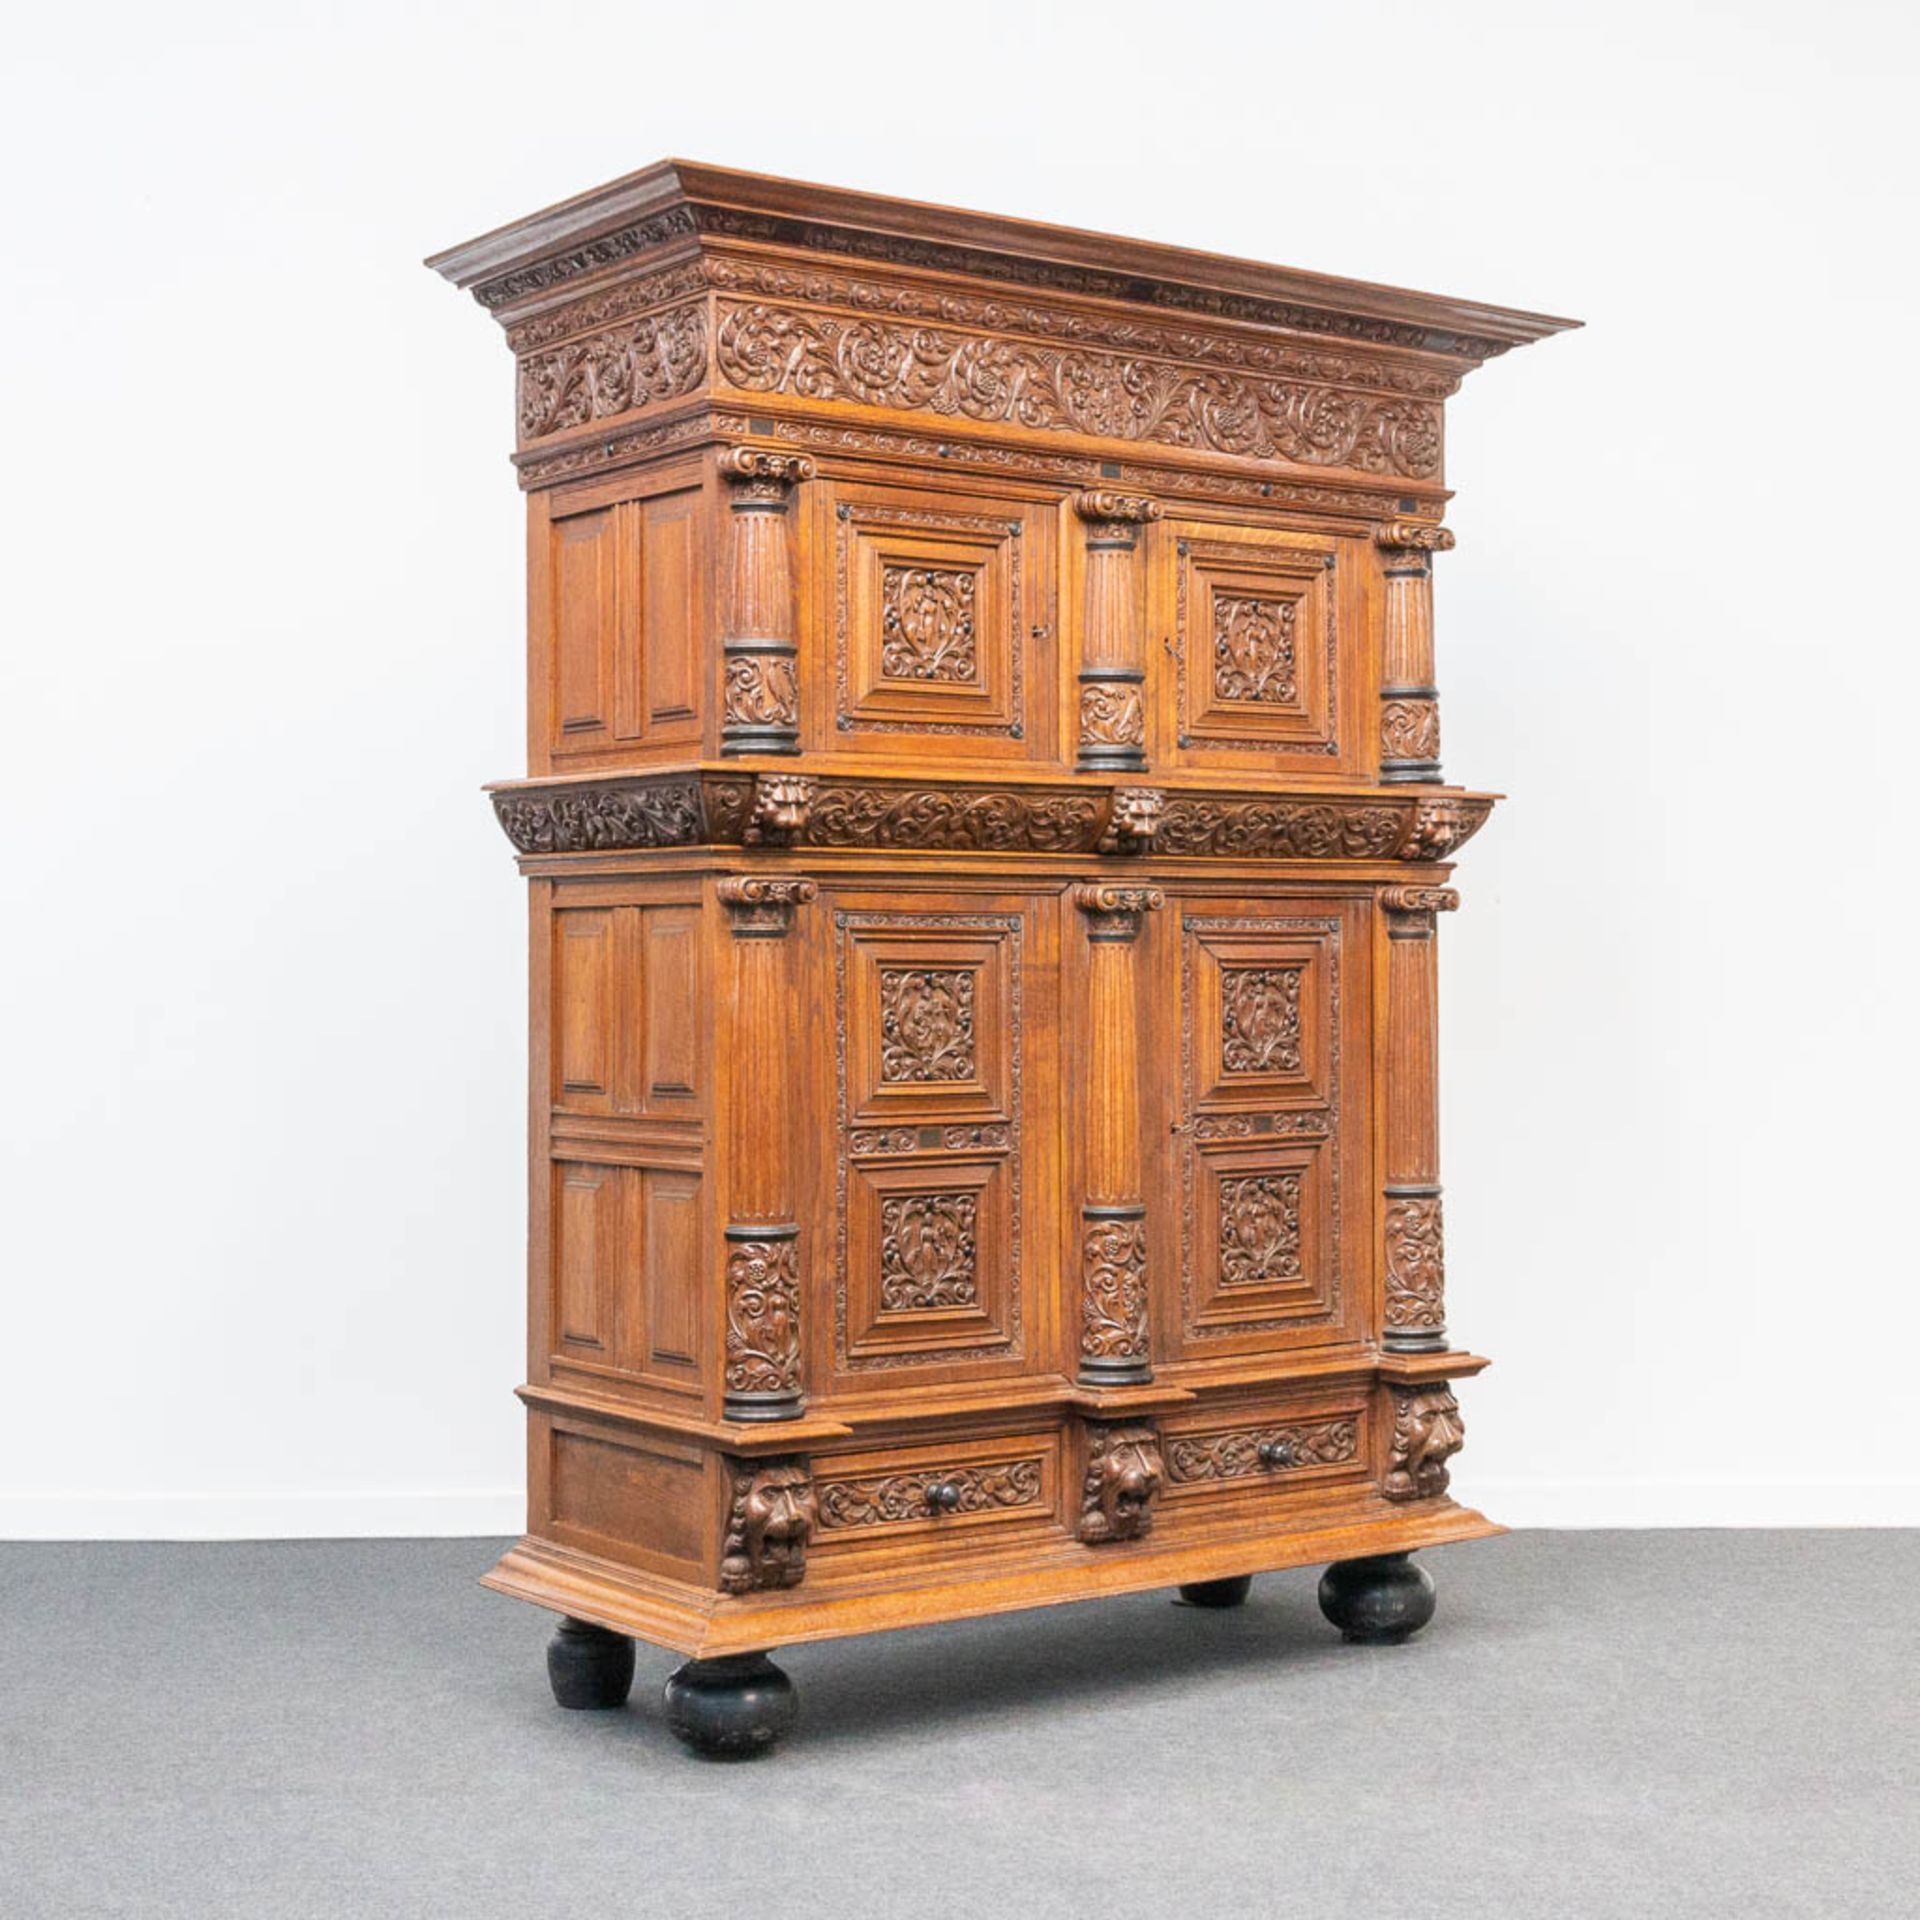 A cabinet, made in Flemish renaissance style, oak with fine sculptures, 19th century. - Image 7 of 27